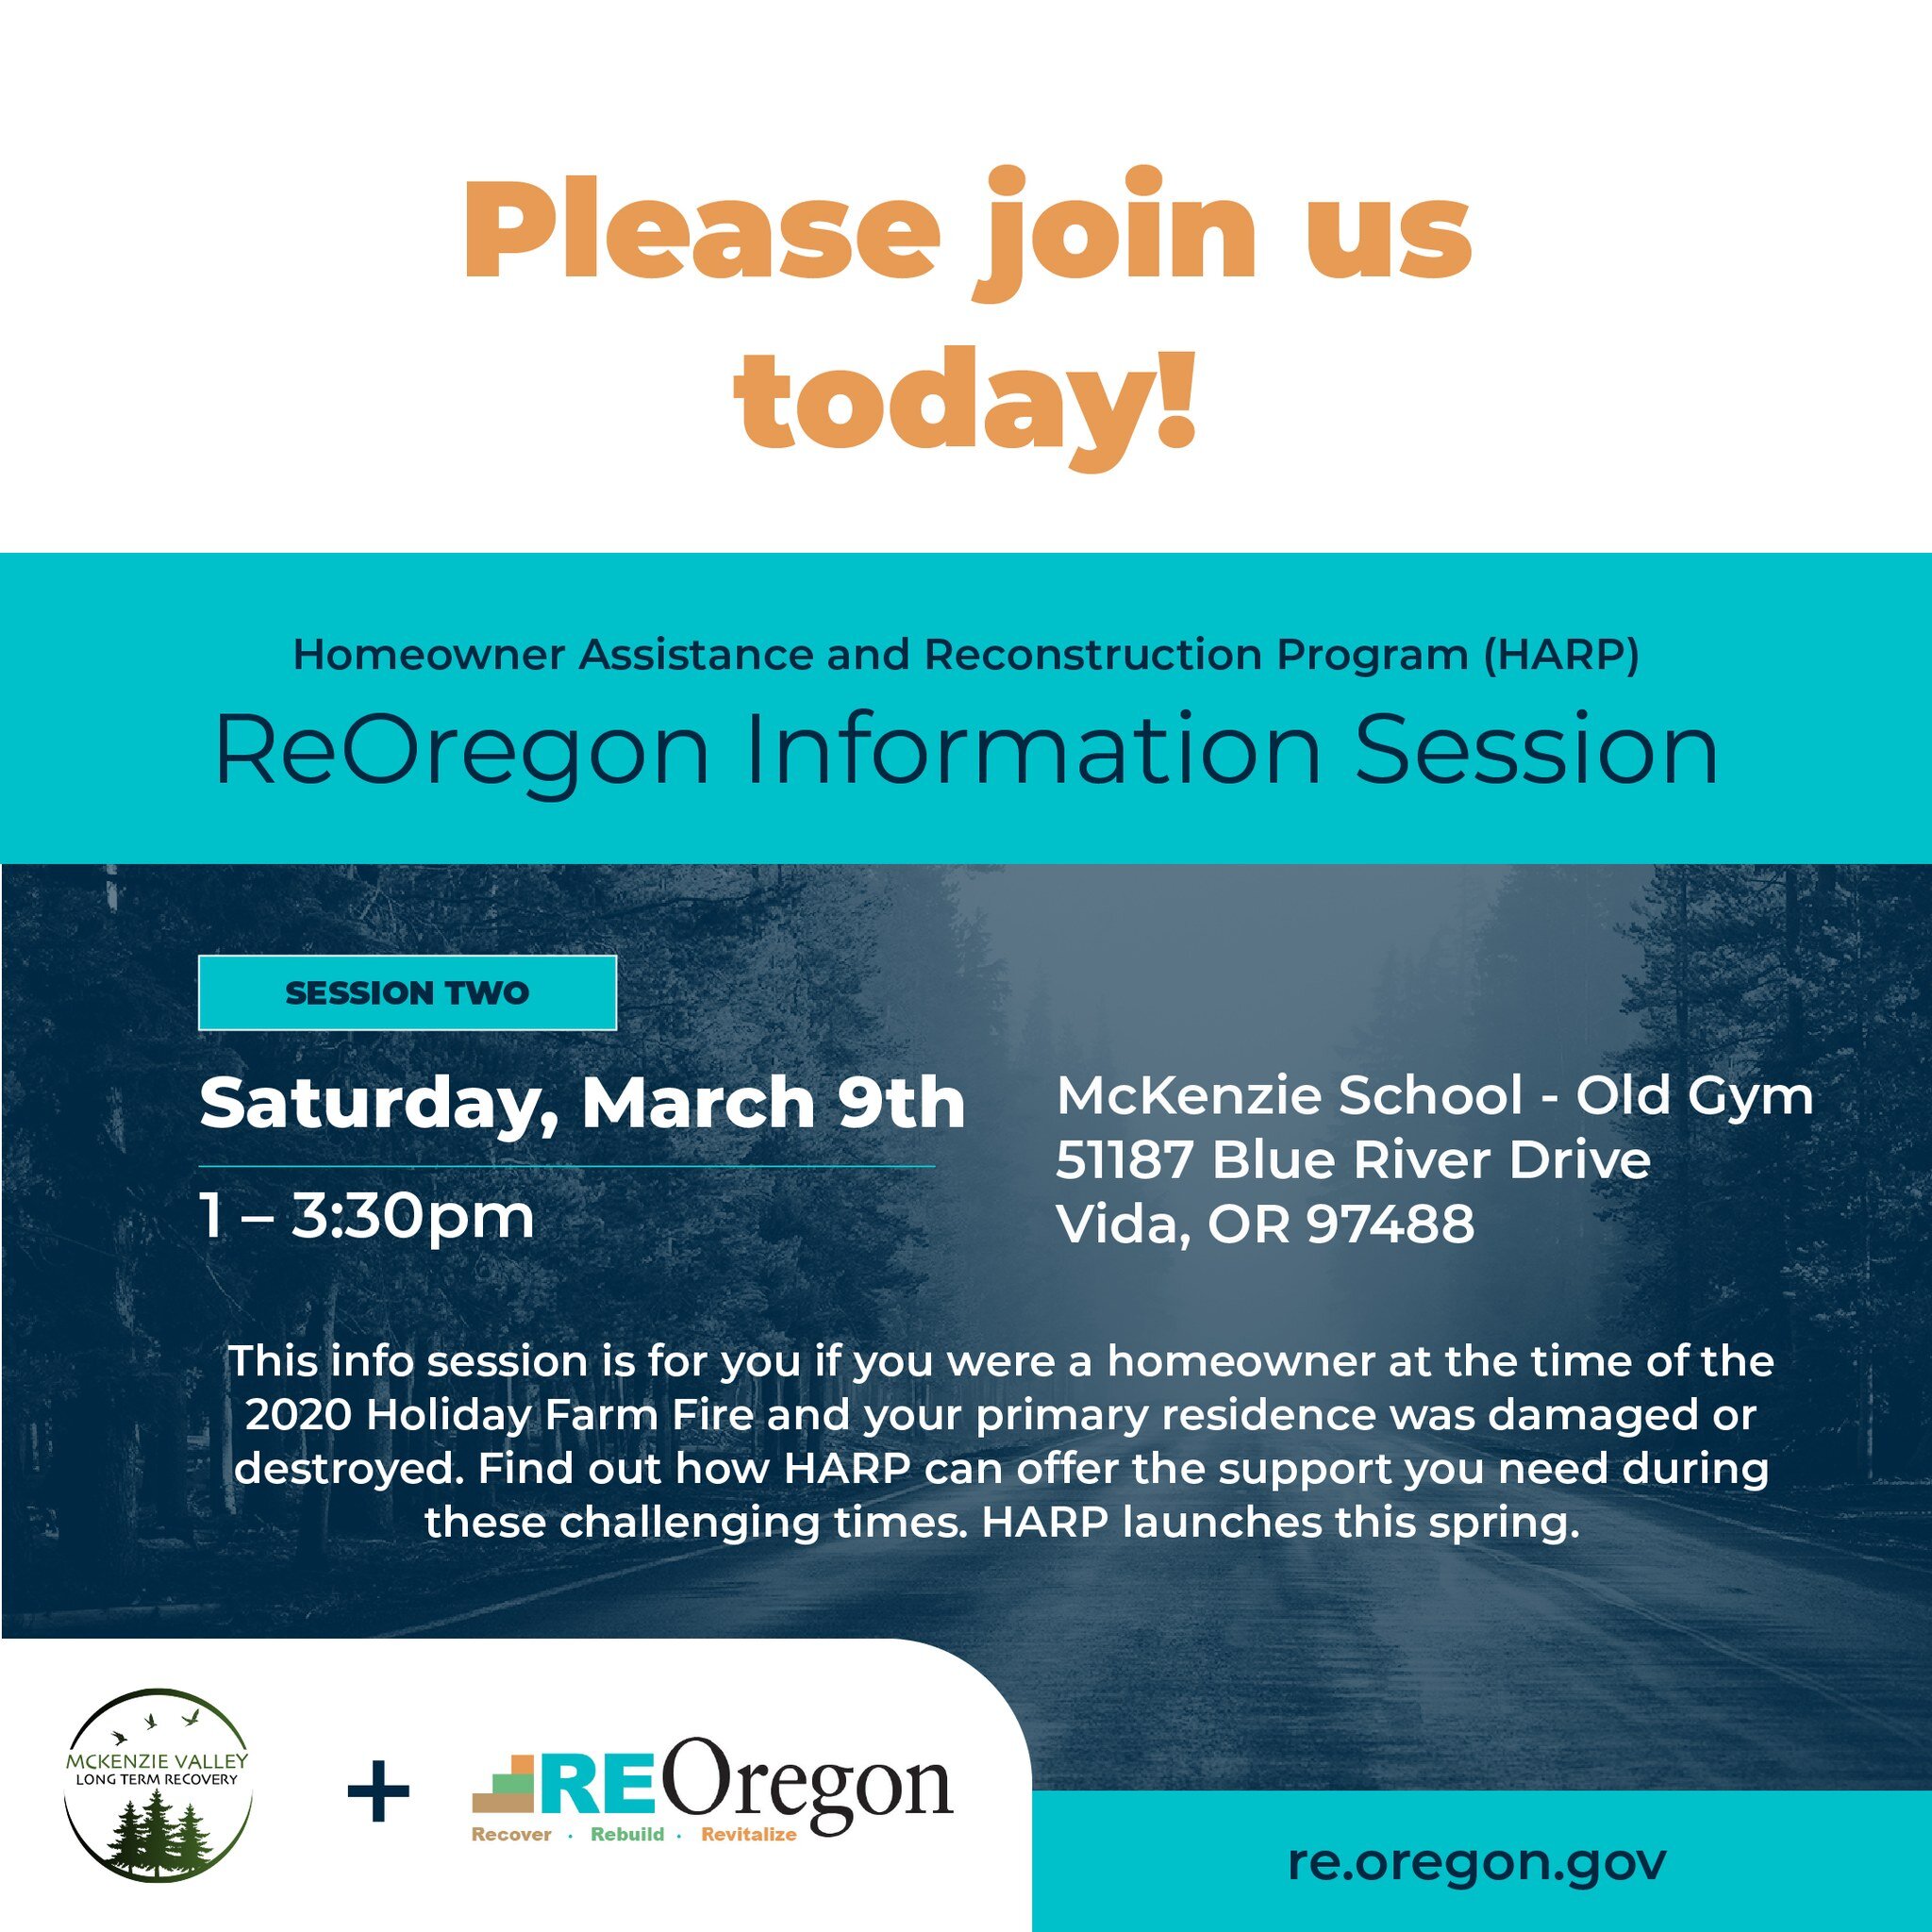 *INFORMATION SESSION TODAY, 3/9!*

If you were a homeowner at the time of the 2020 Holiday Farm Fire and your primary residence was damaged or destroyed, the ReOregon Homeowner Assistance and Reconstruction Program (HARP) may be able to offer the sup